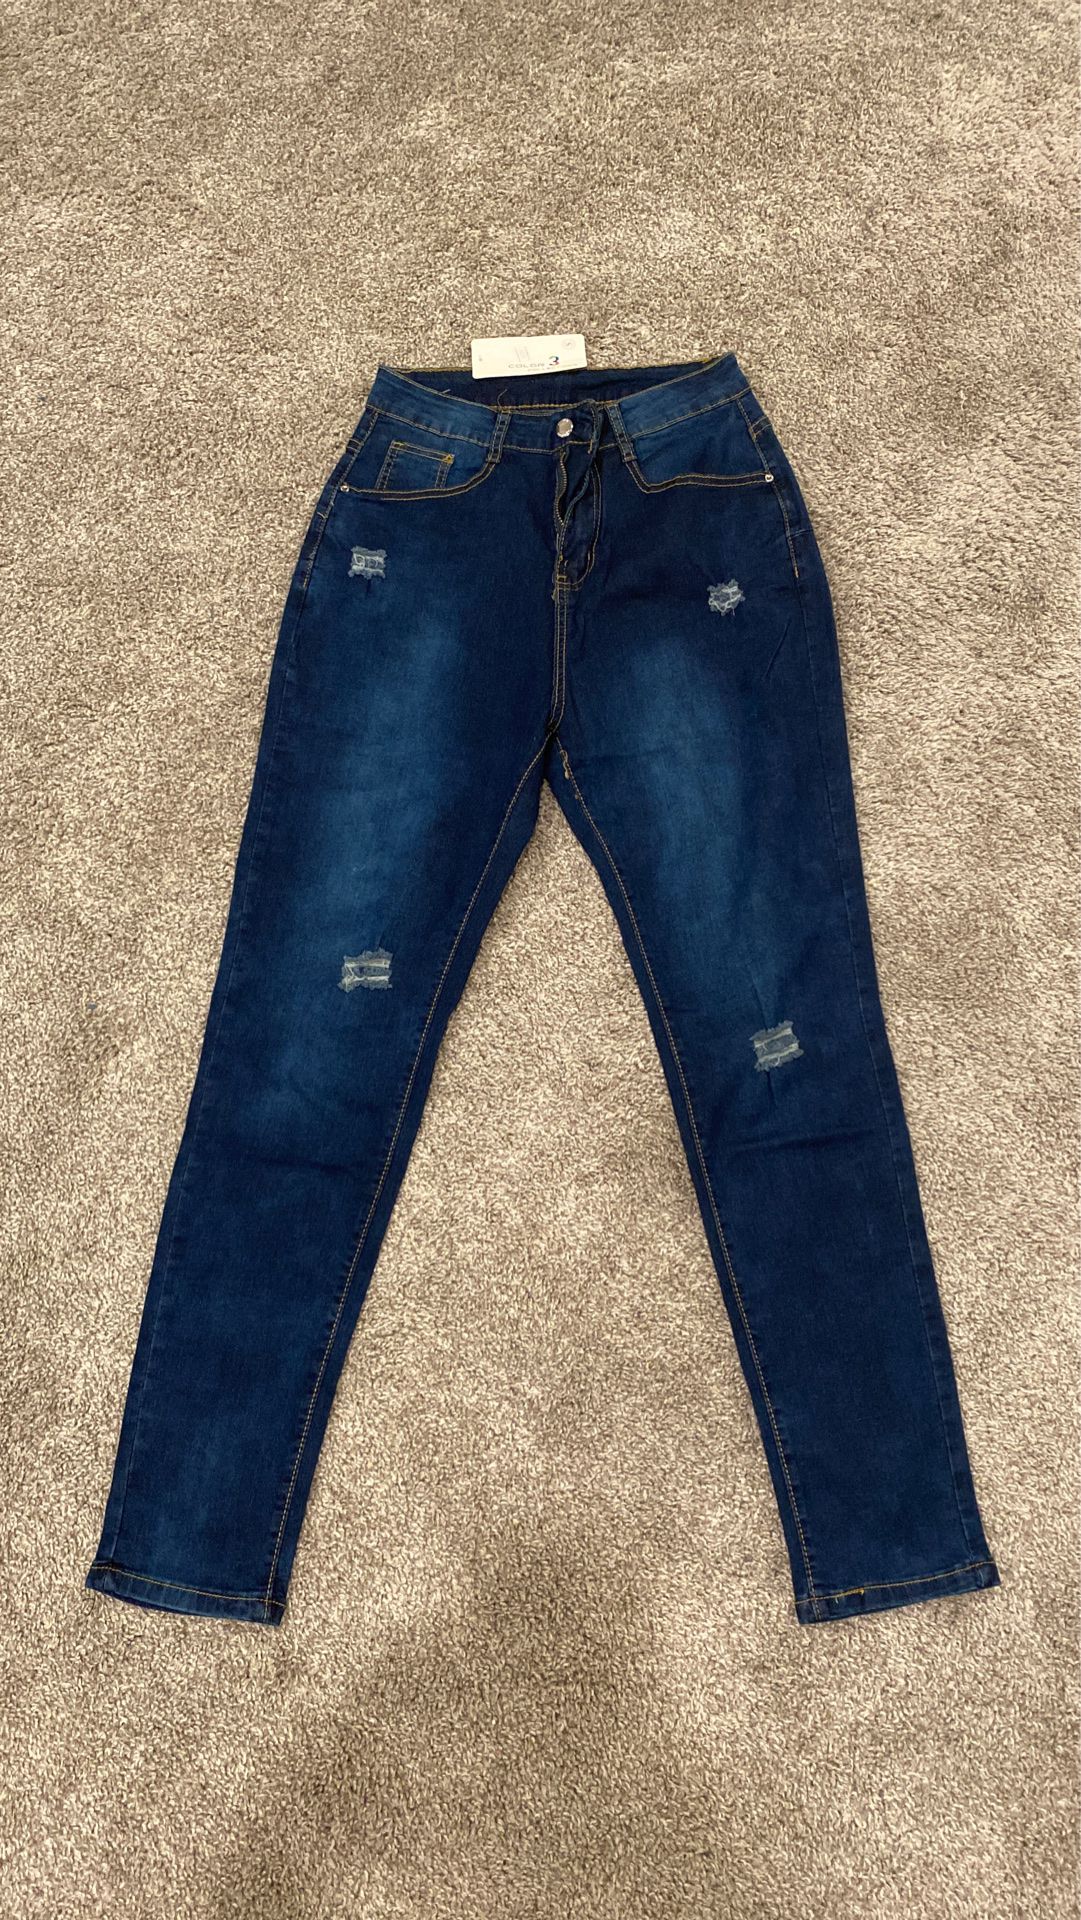 Dark faded wash skinny jeans, brand new never worn. Size Small.